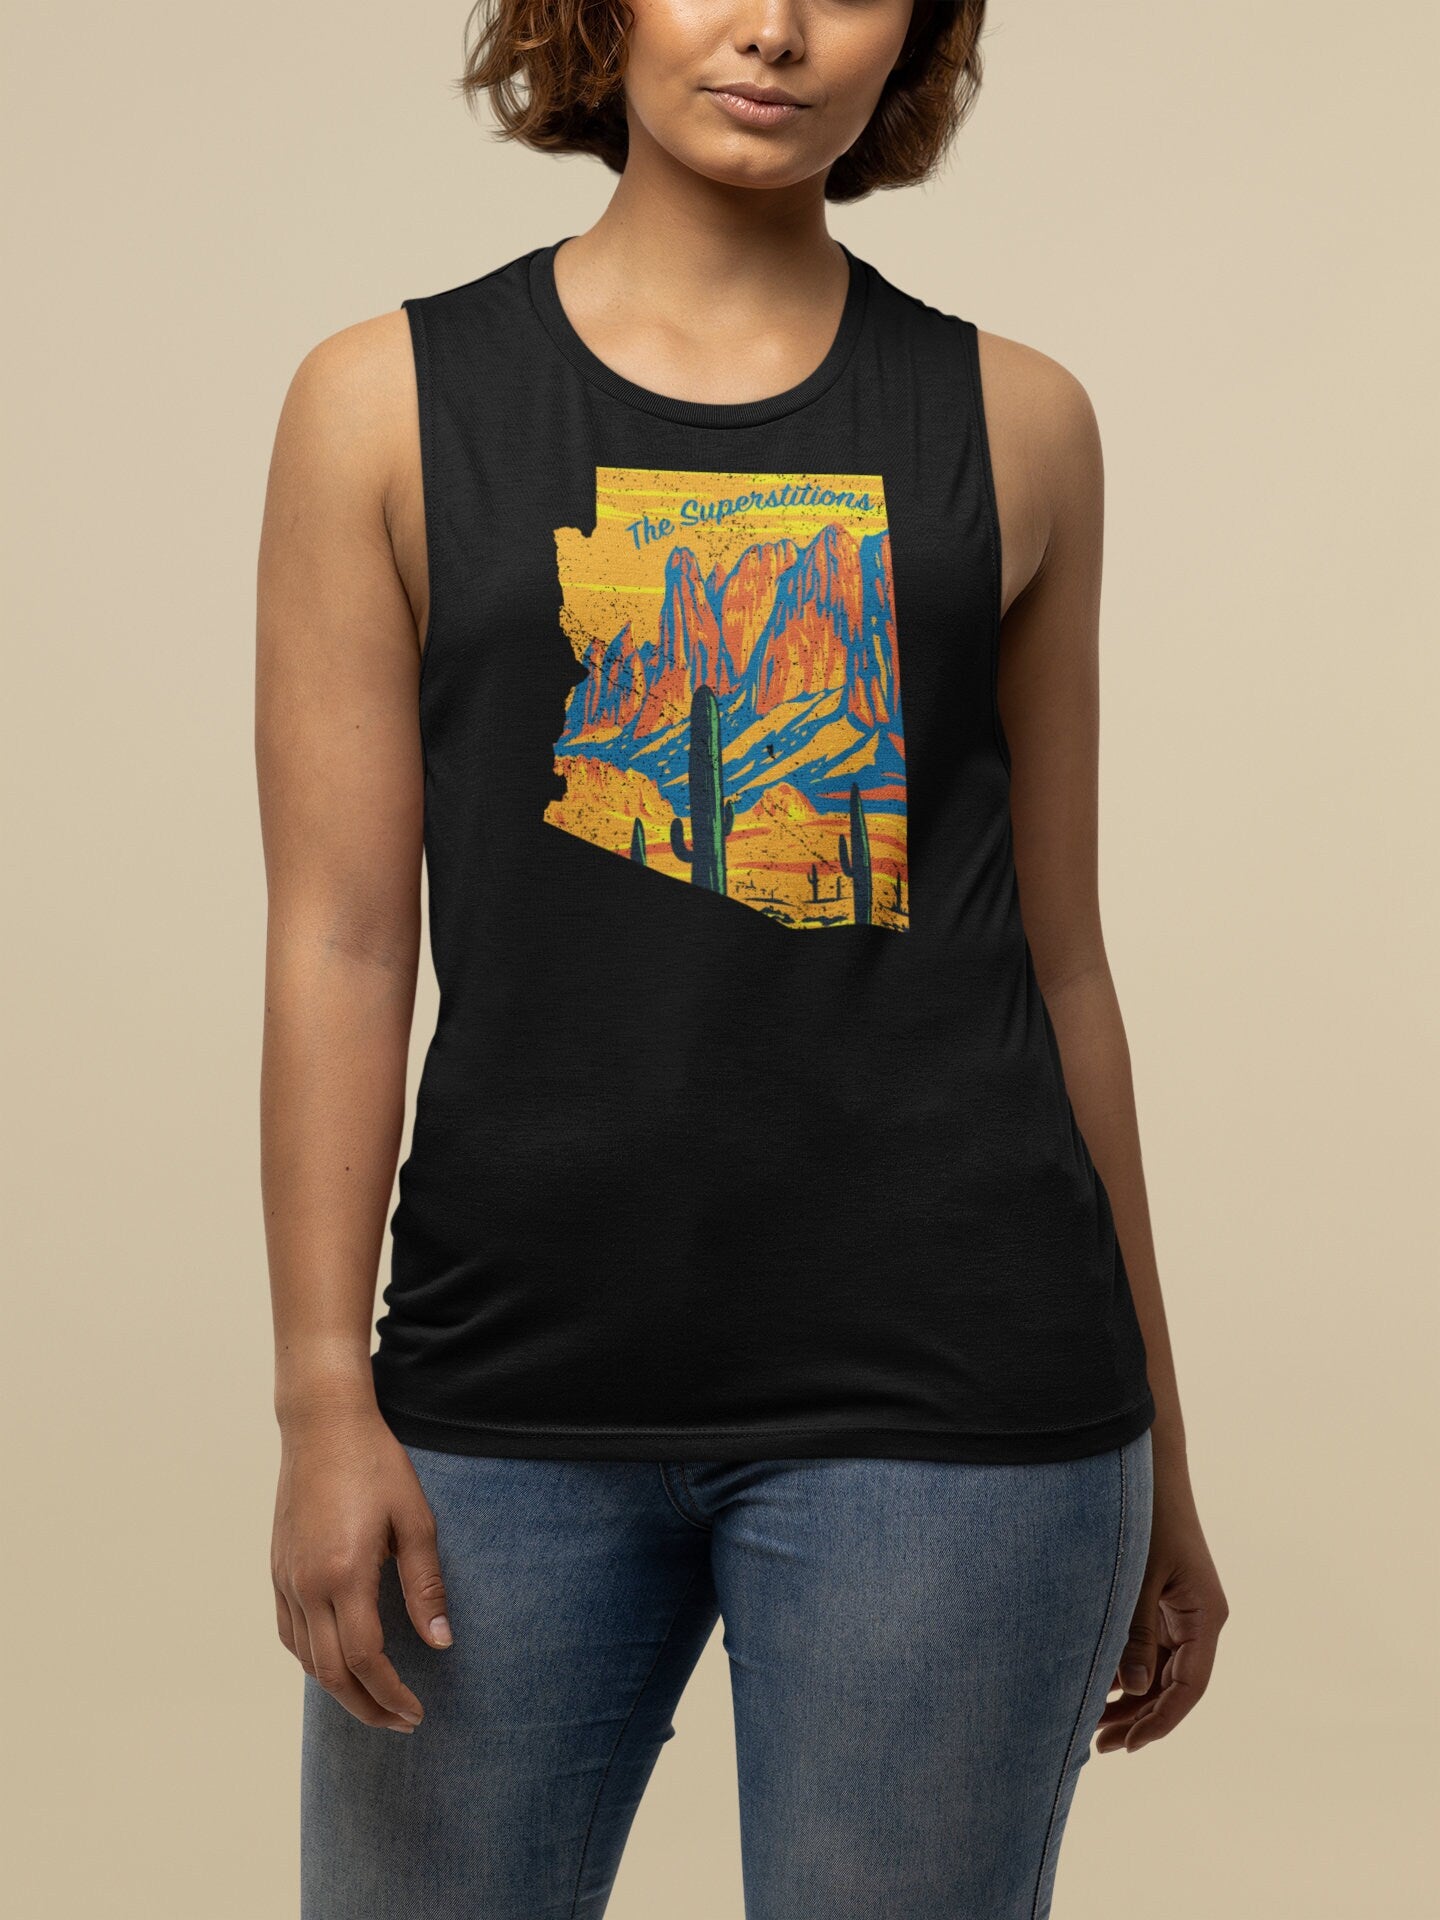 Emergency Print House The Superstitions Hiking Muscle Tank Top